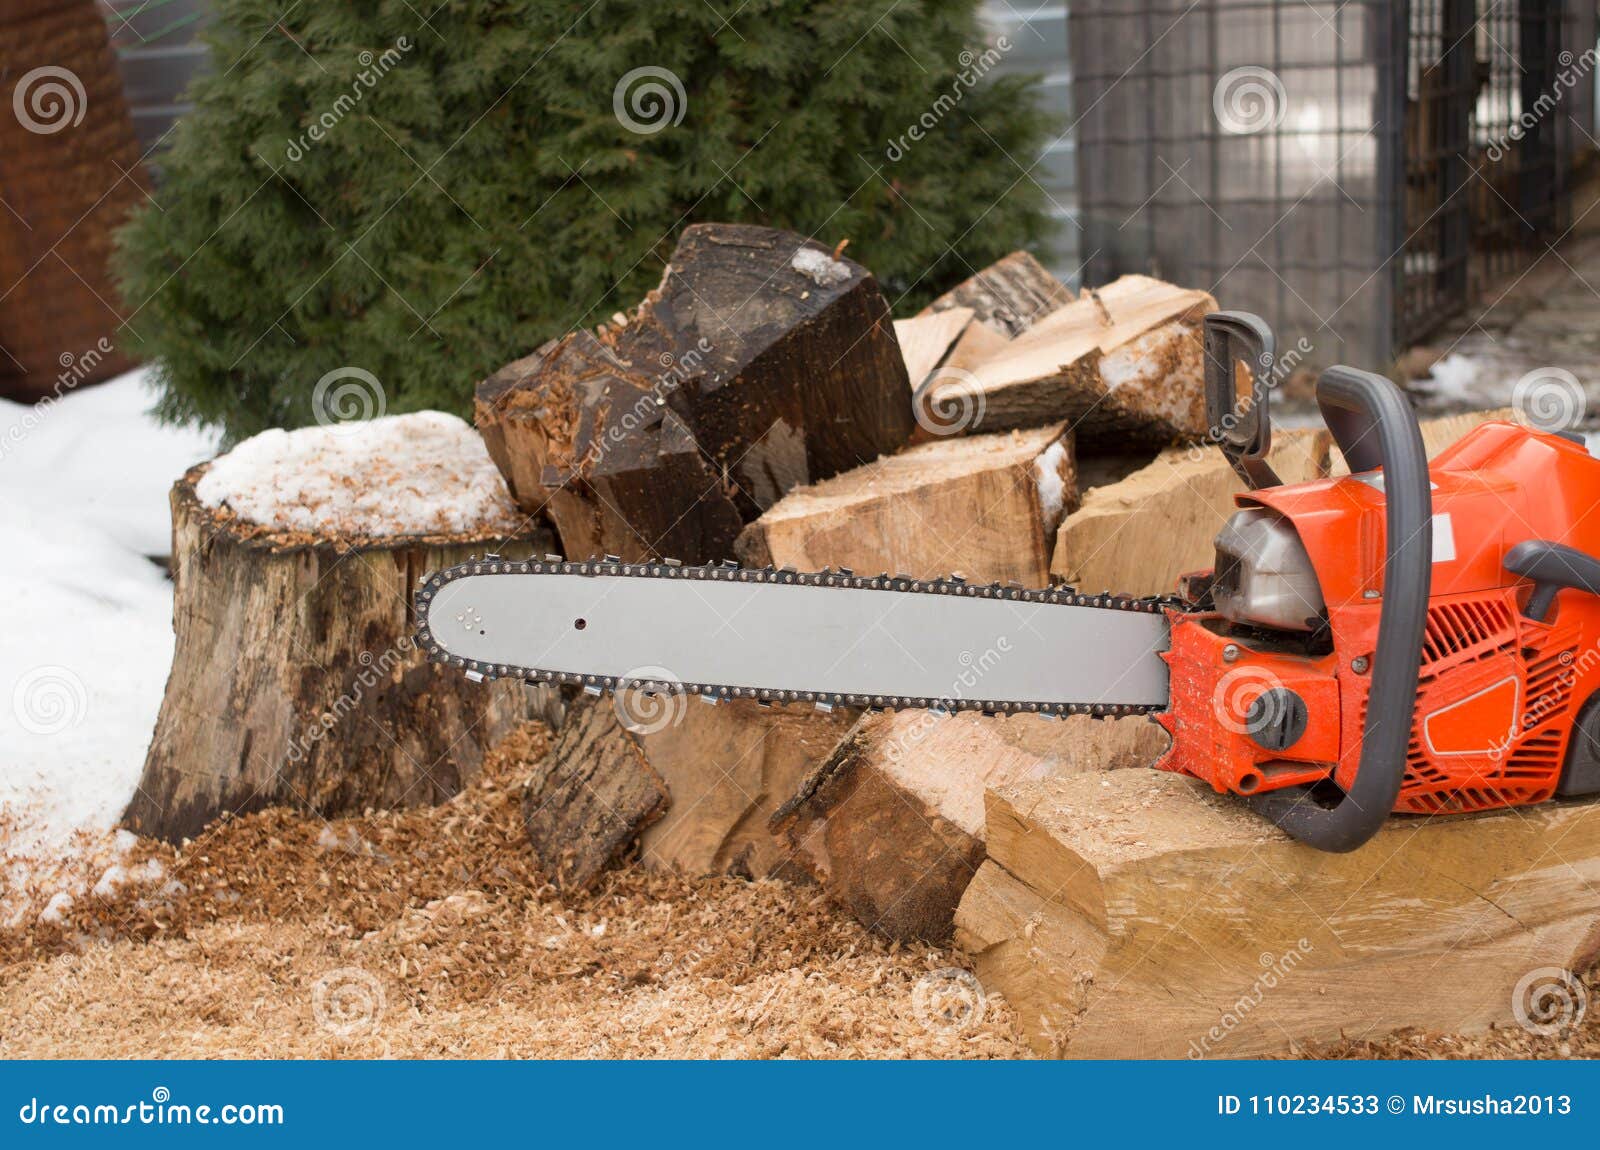 how do you like this chainsaw?